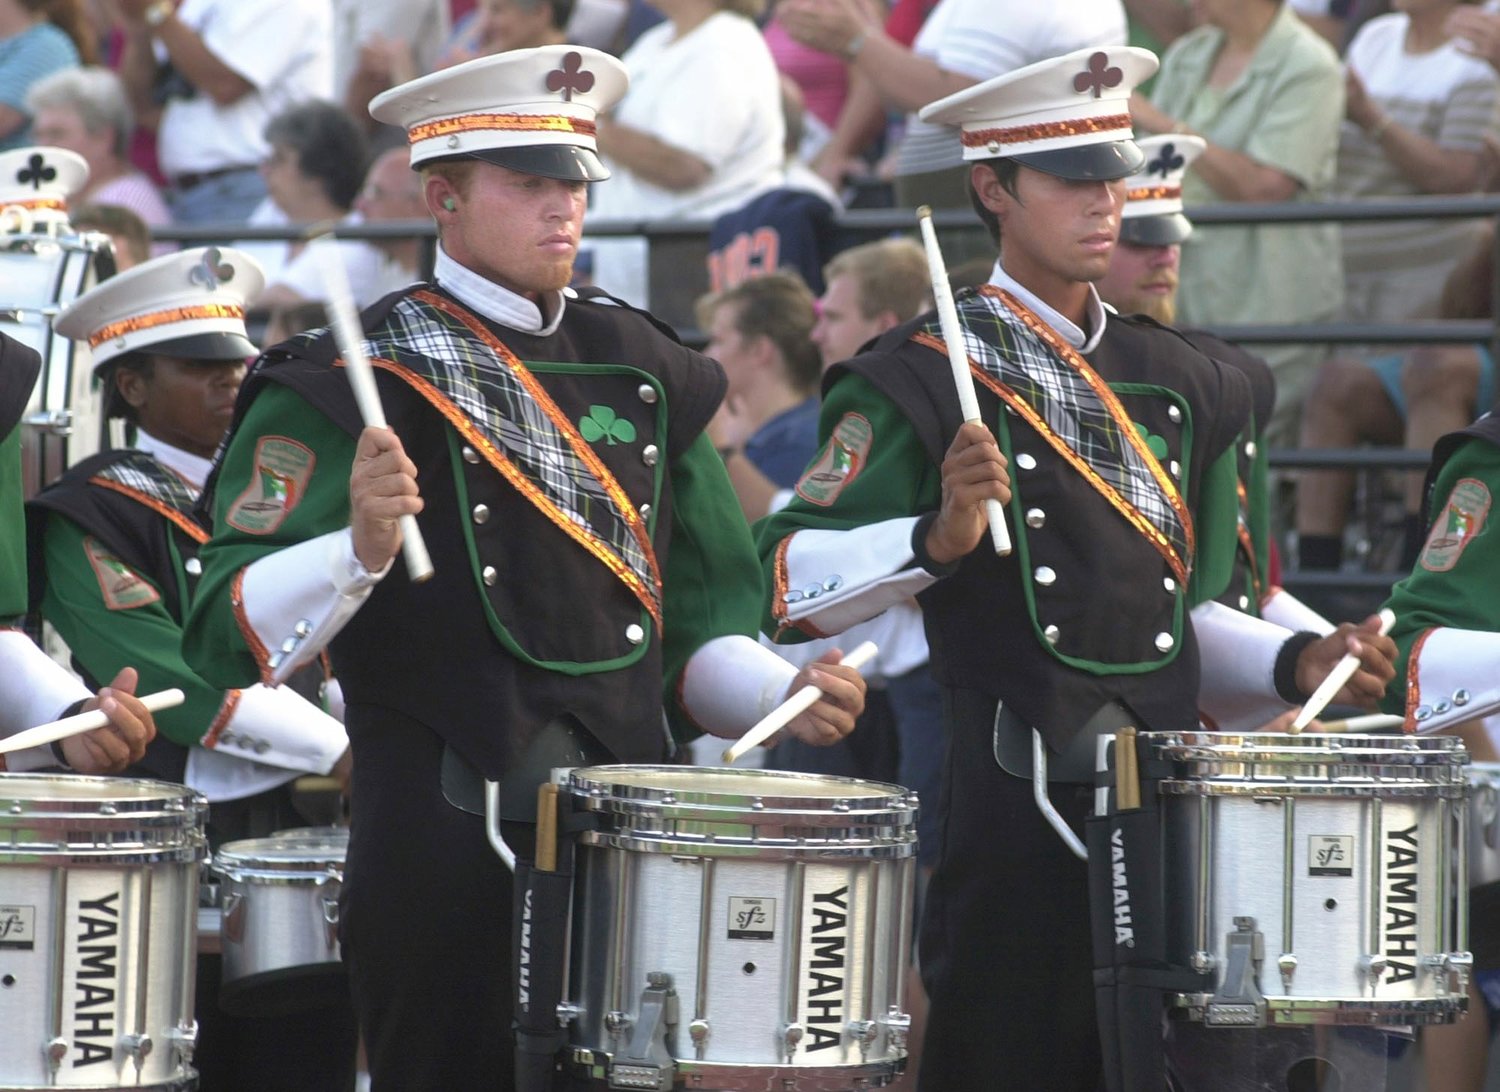 In an announcement posted on the Drums Along the Mohawk Facebook page, organizers said they had officially stepped down from hosting the Drum Corps International event.